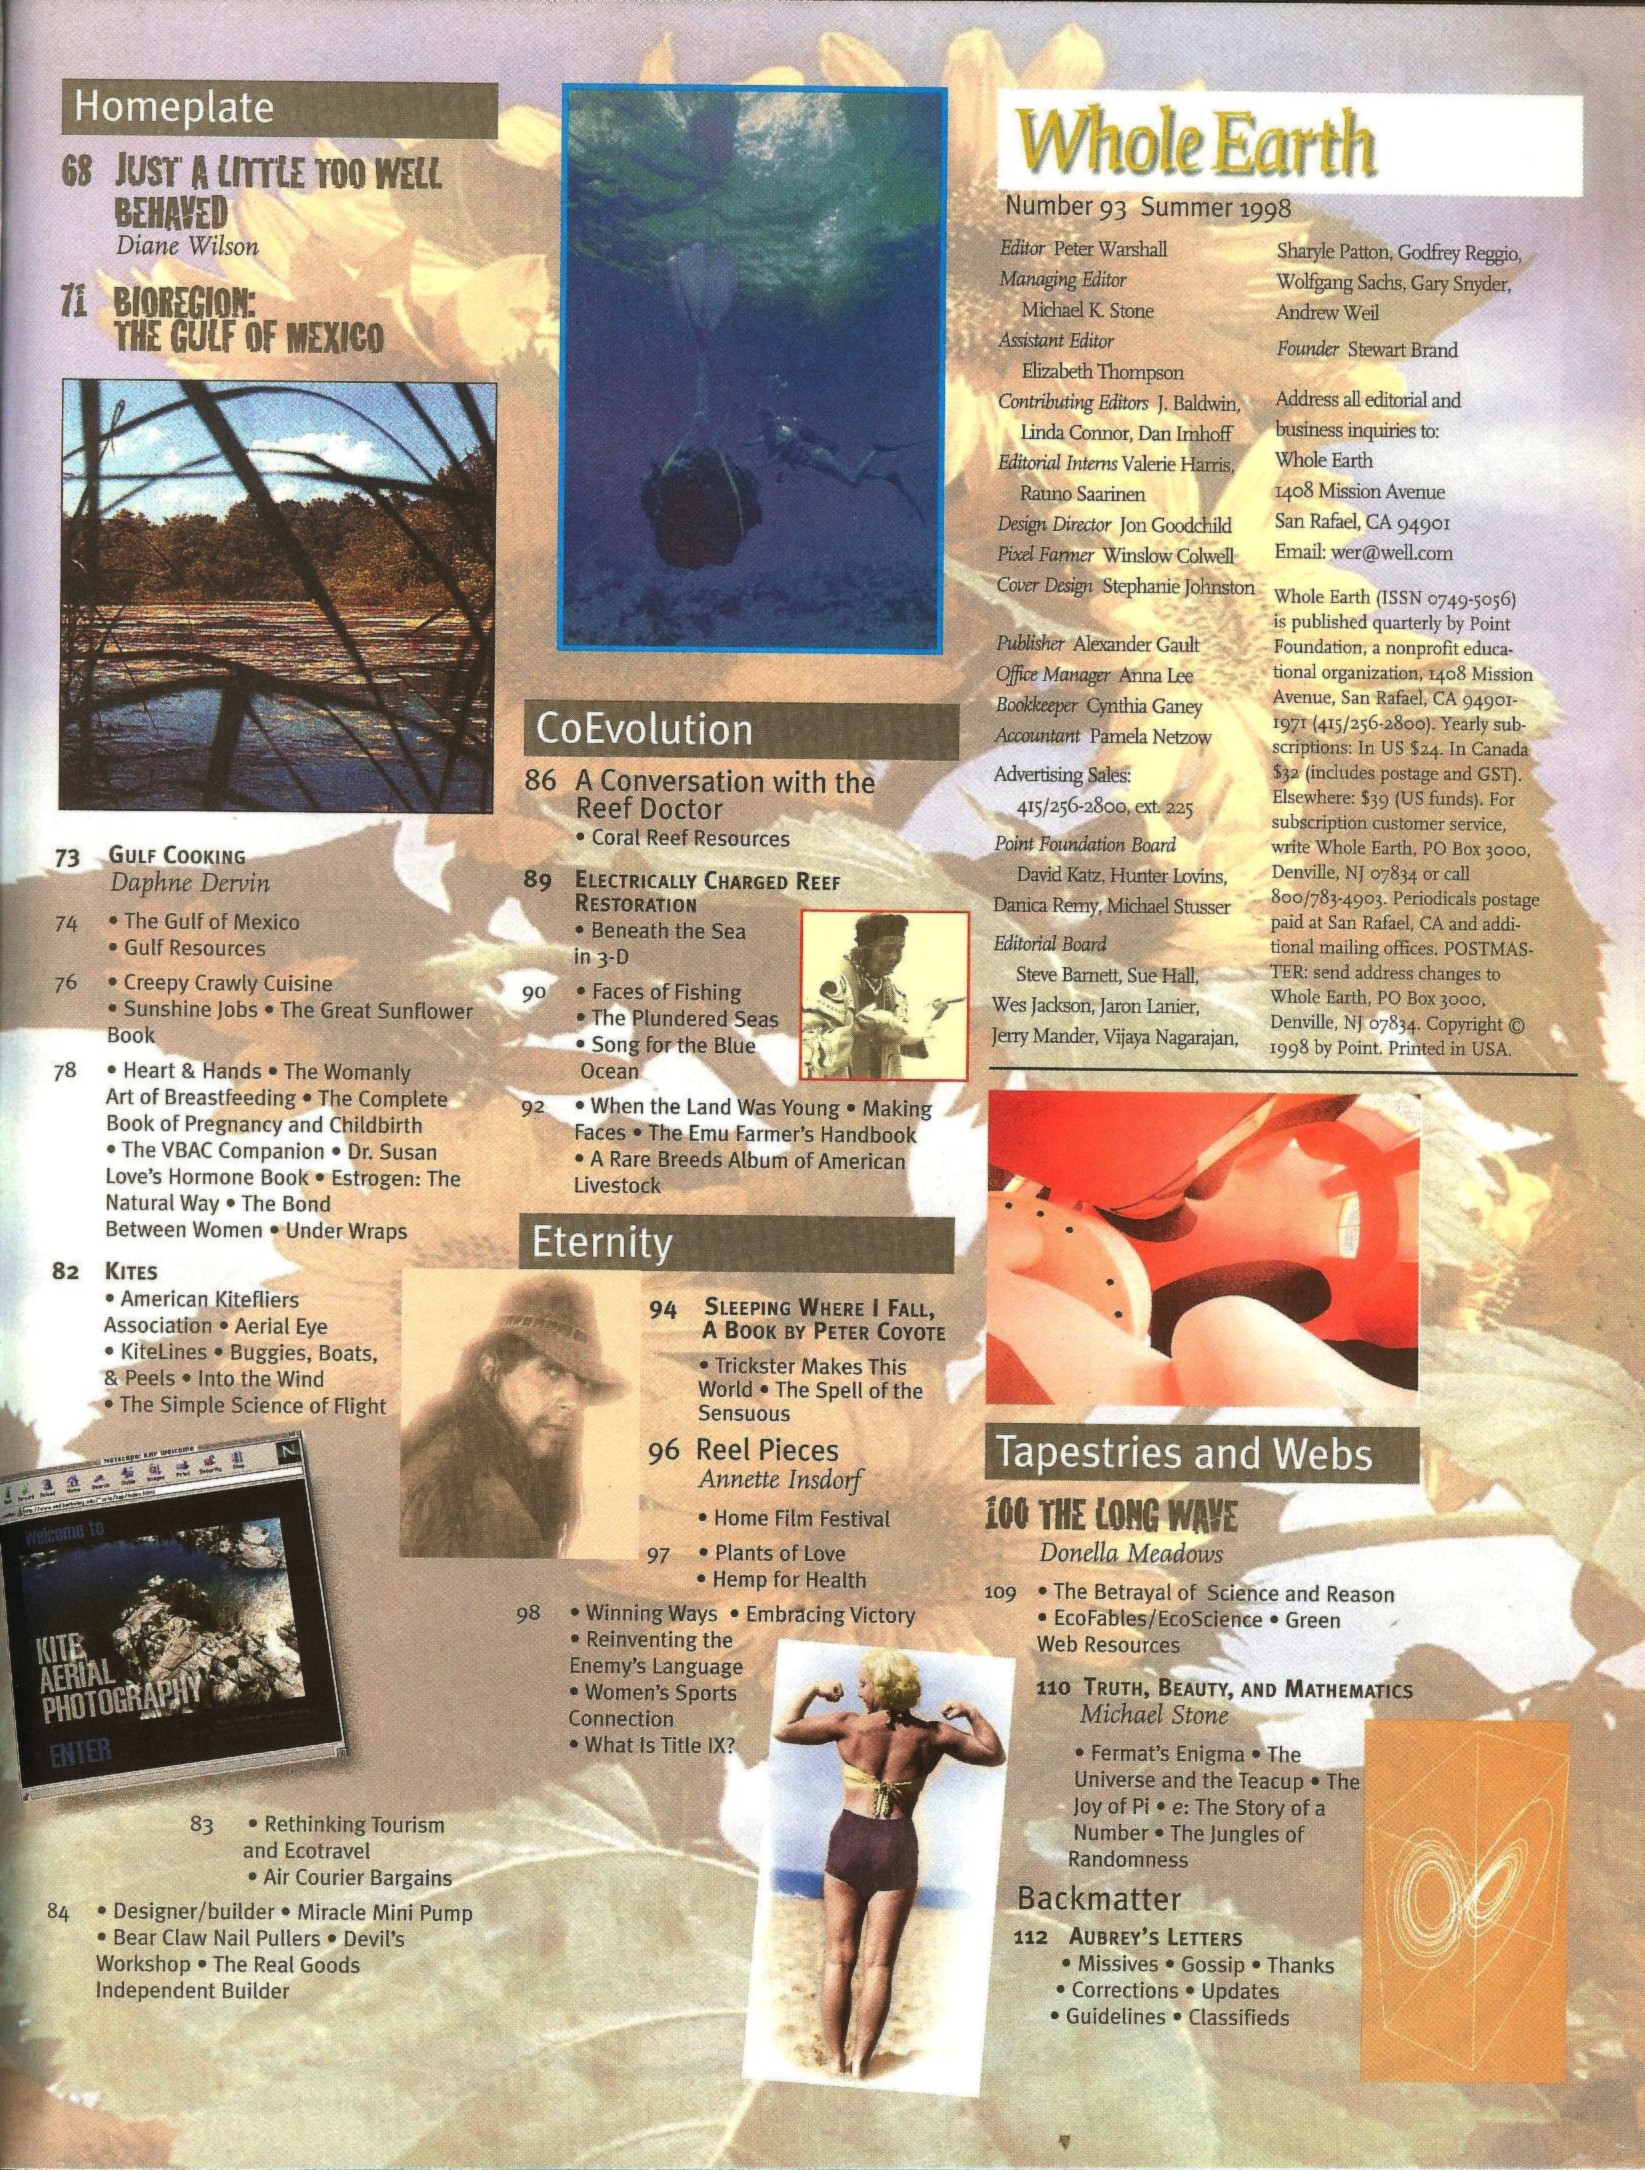 Table of contents, issue 93 (summer 1998) showing use of color